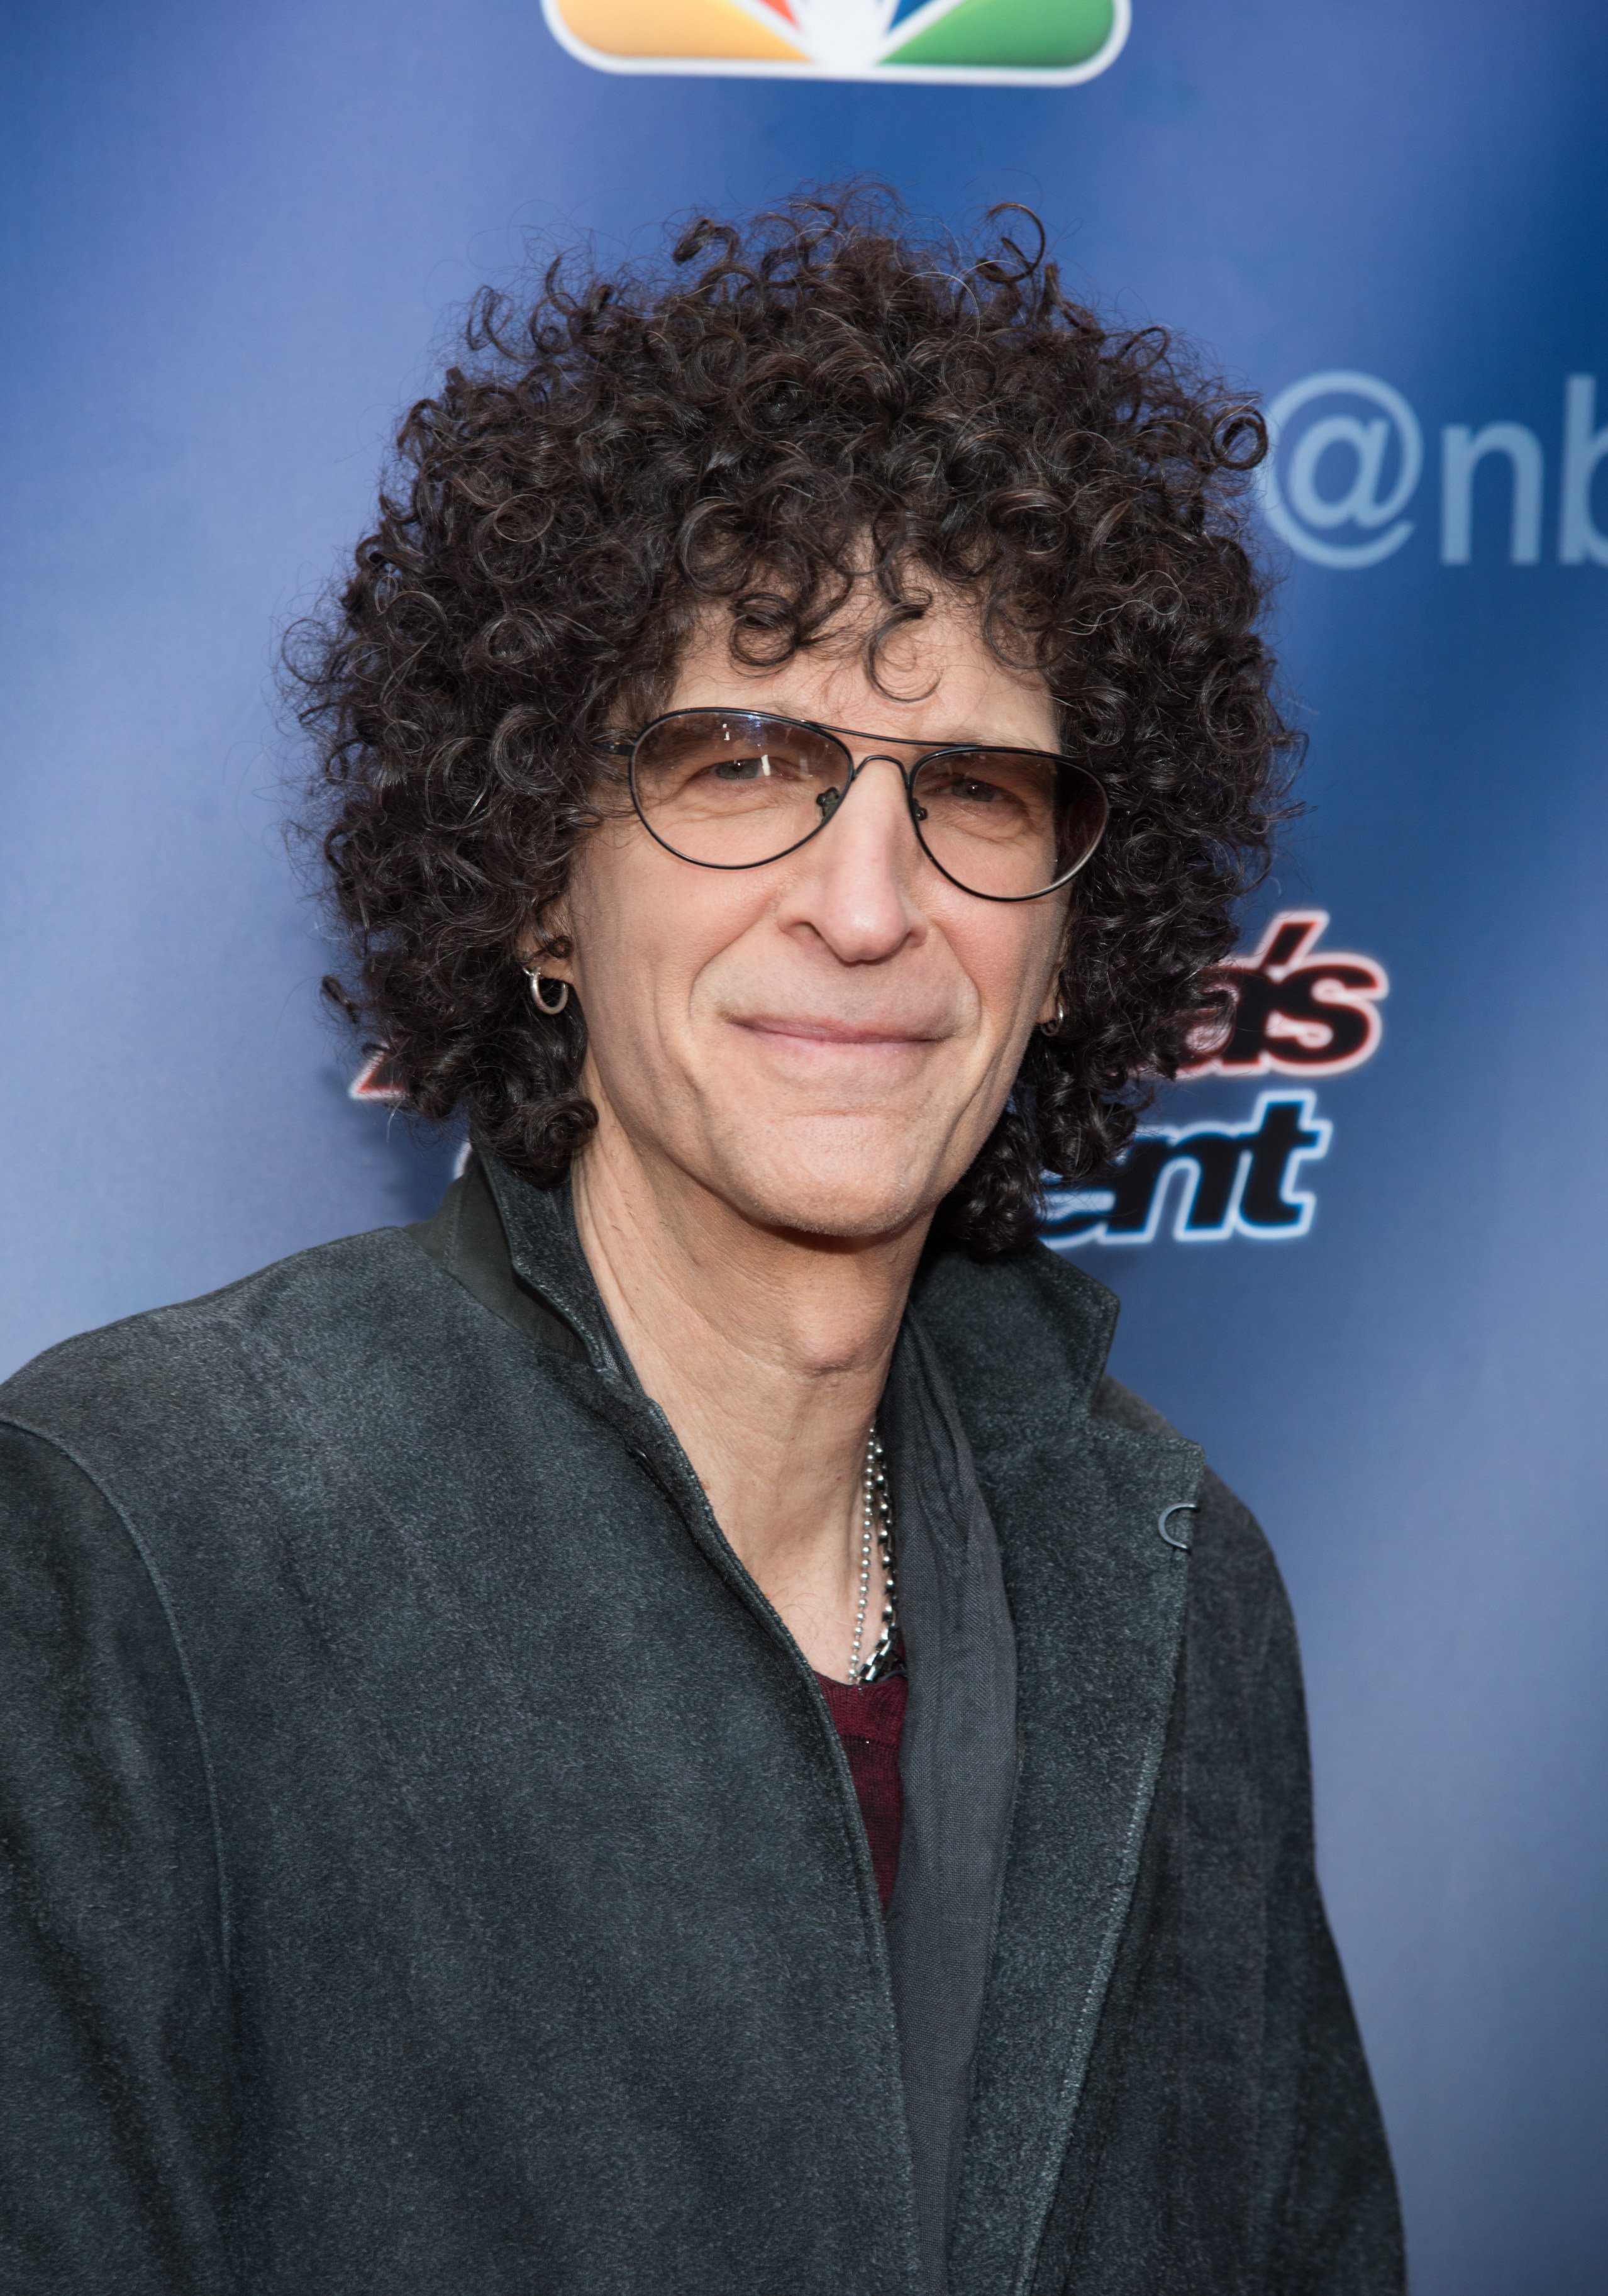 Howard Stern at New Jersey Performing Arts Center on March 2, 2015 | Photo: Getty Images